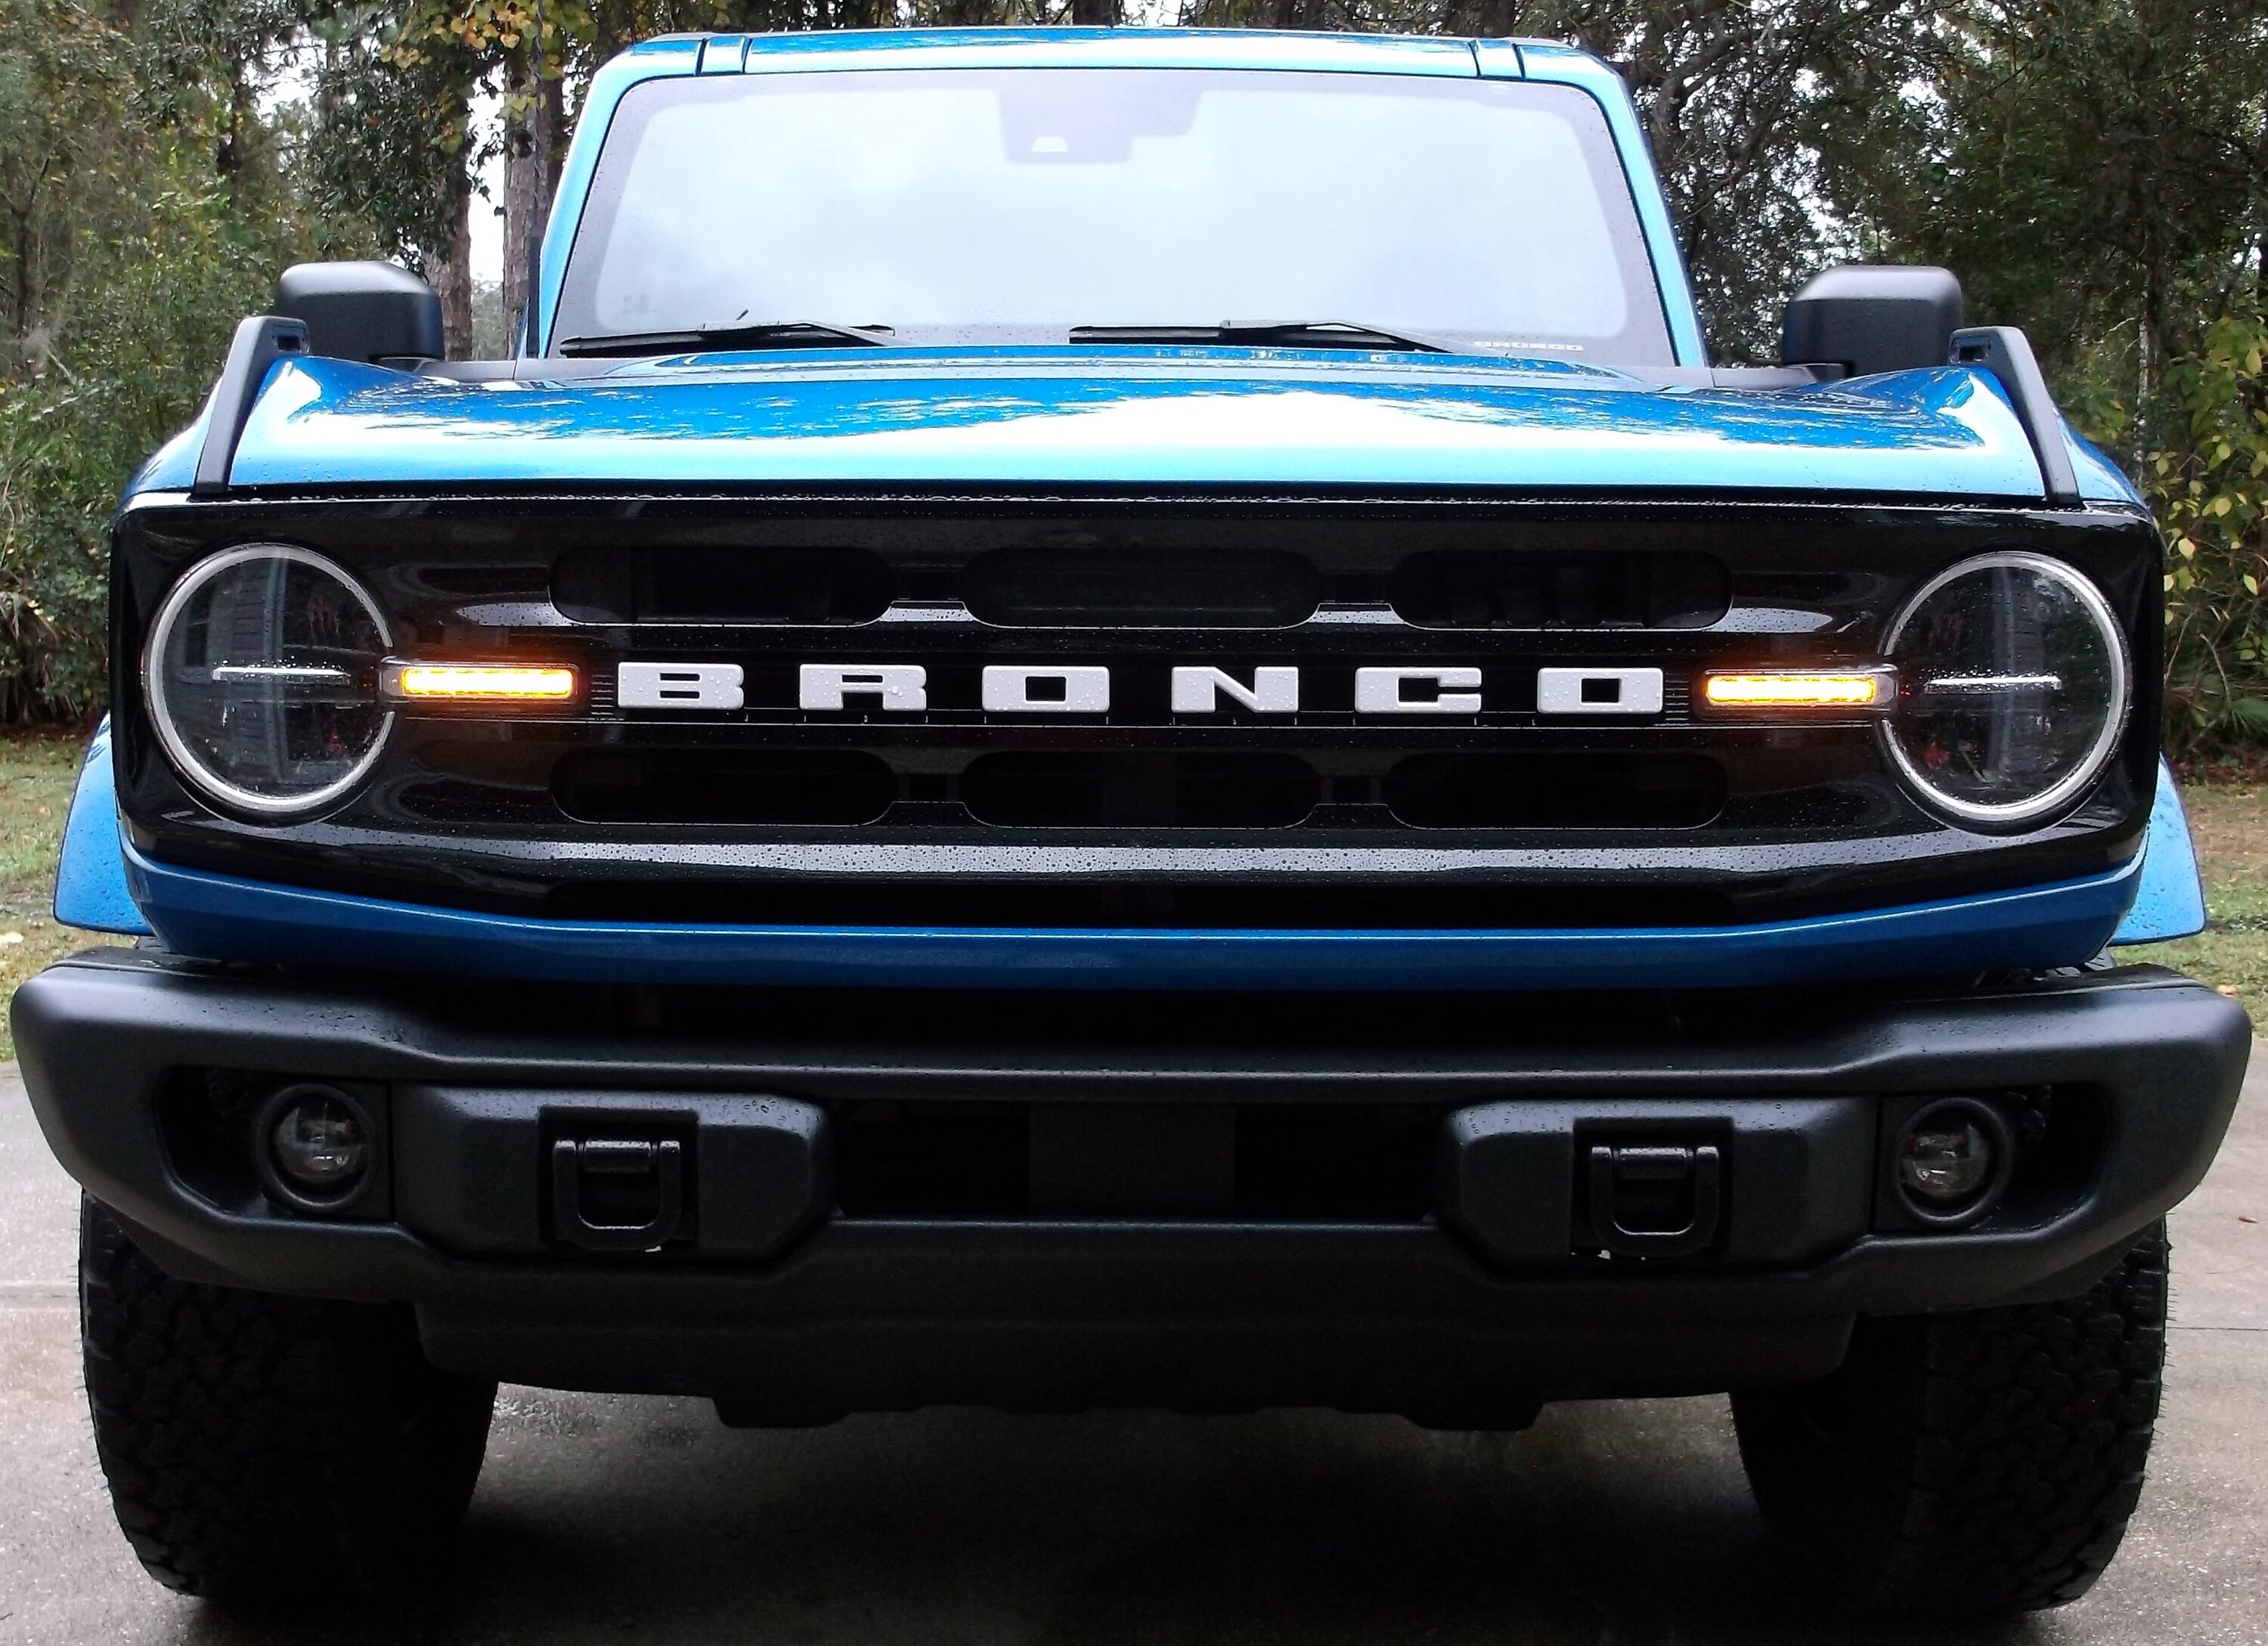 Ford Bronco What did you do TO / WITH your Bronco today? 👨🏻‍🔧🧰🚿🛠 DSCF4307.JPG